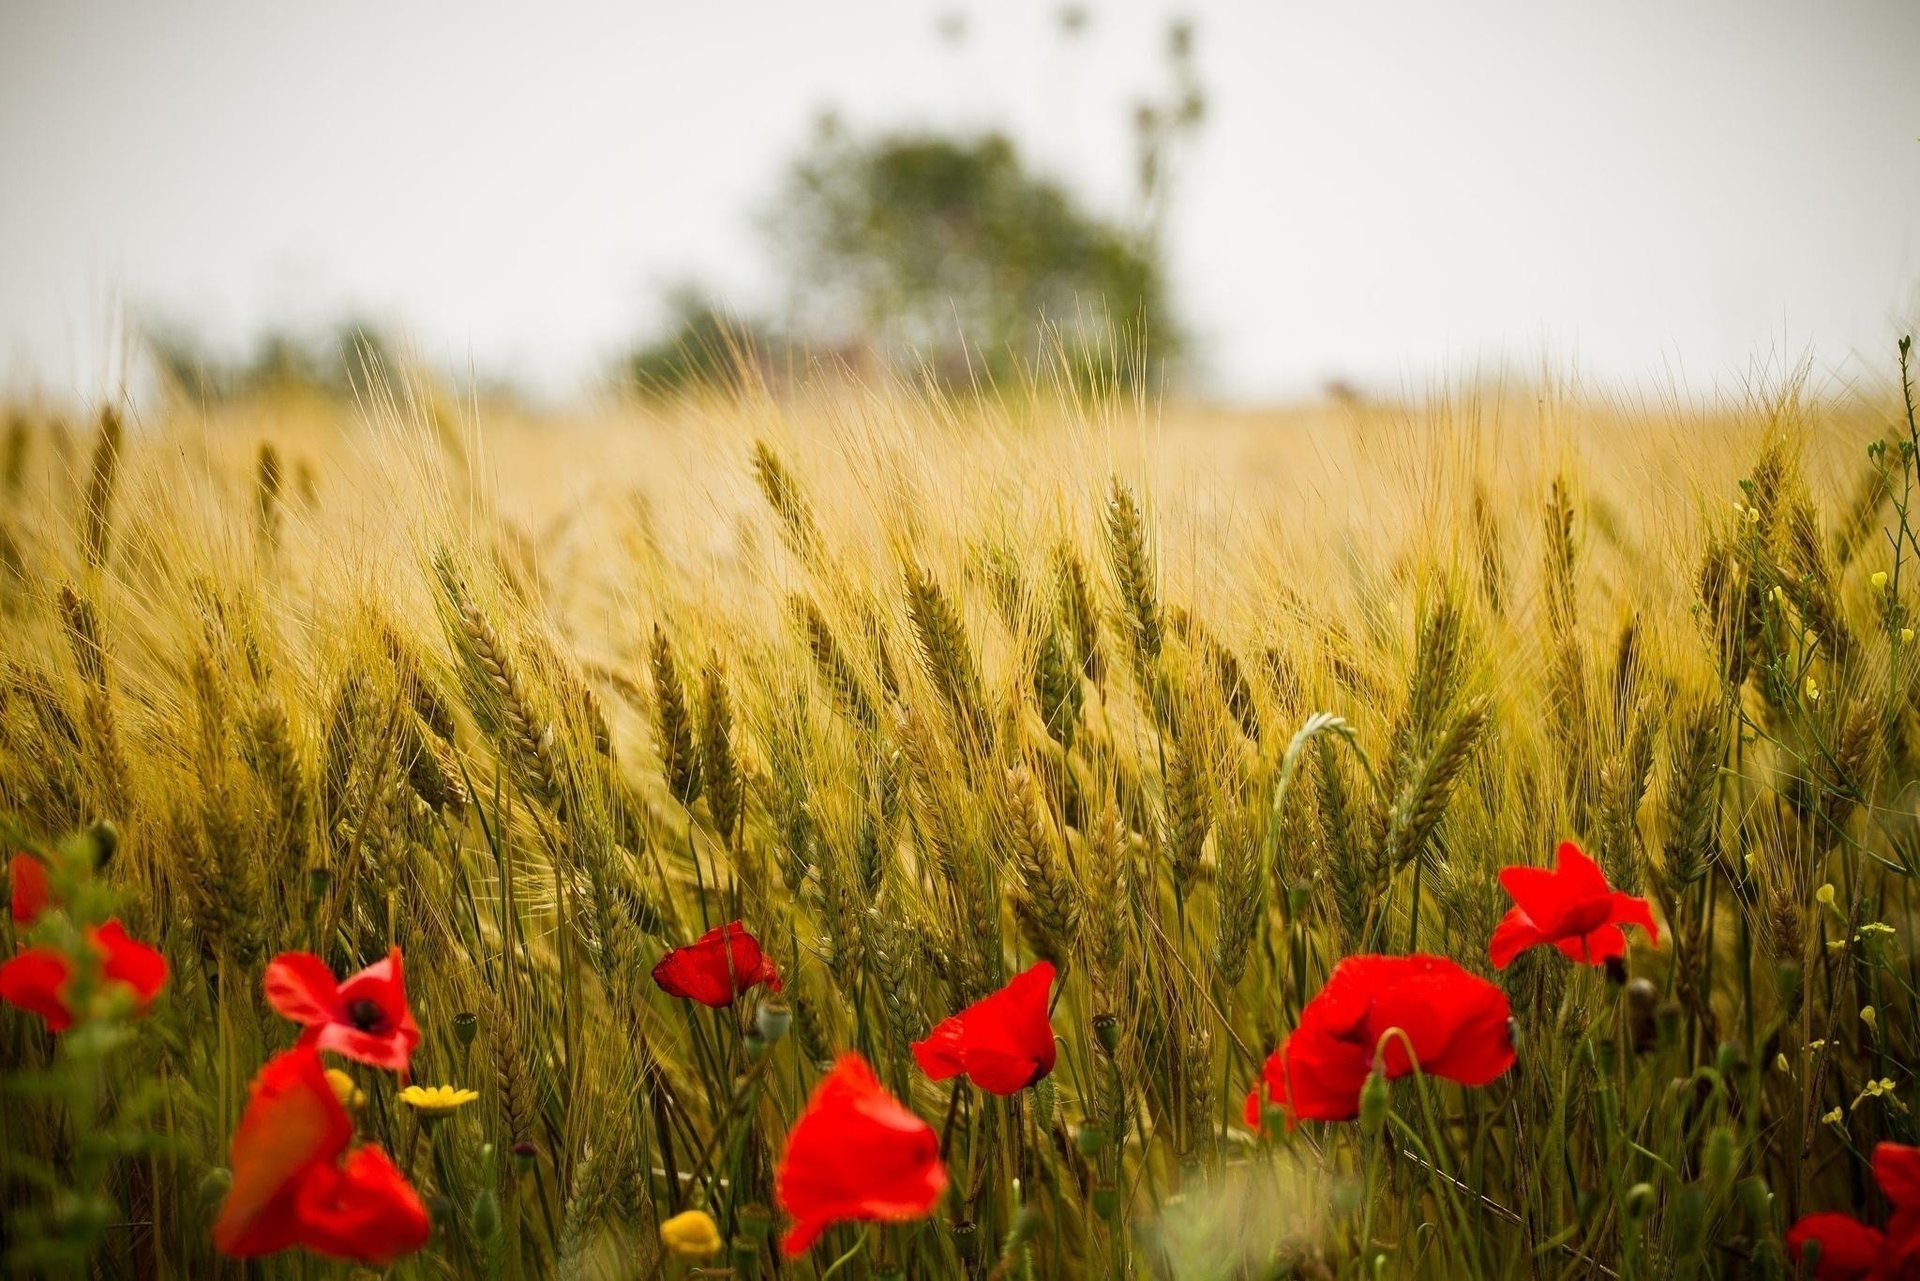 Red poppies in a field among wheat